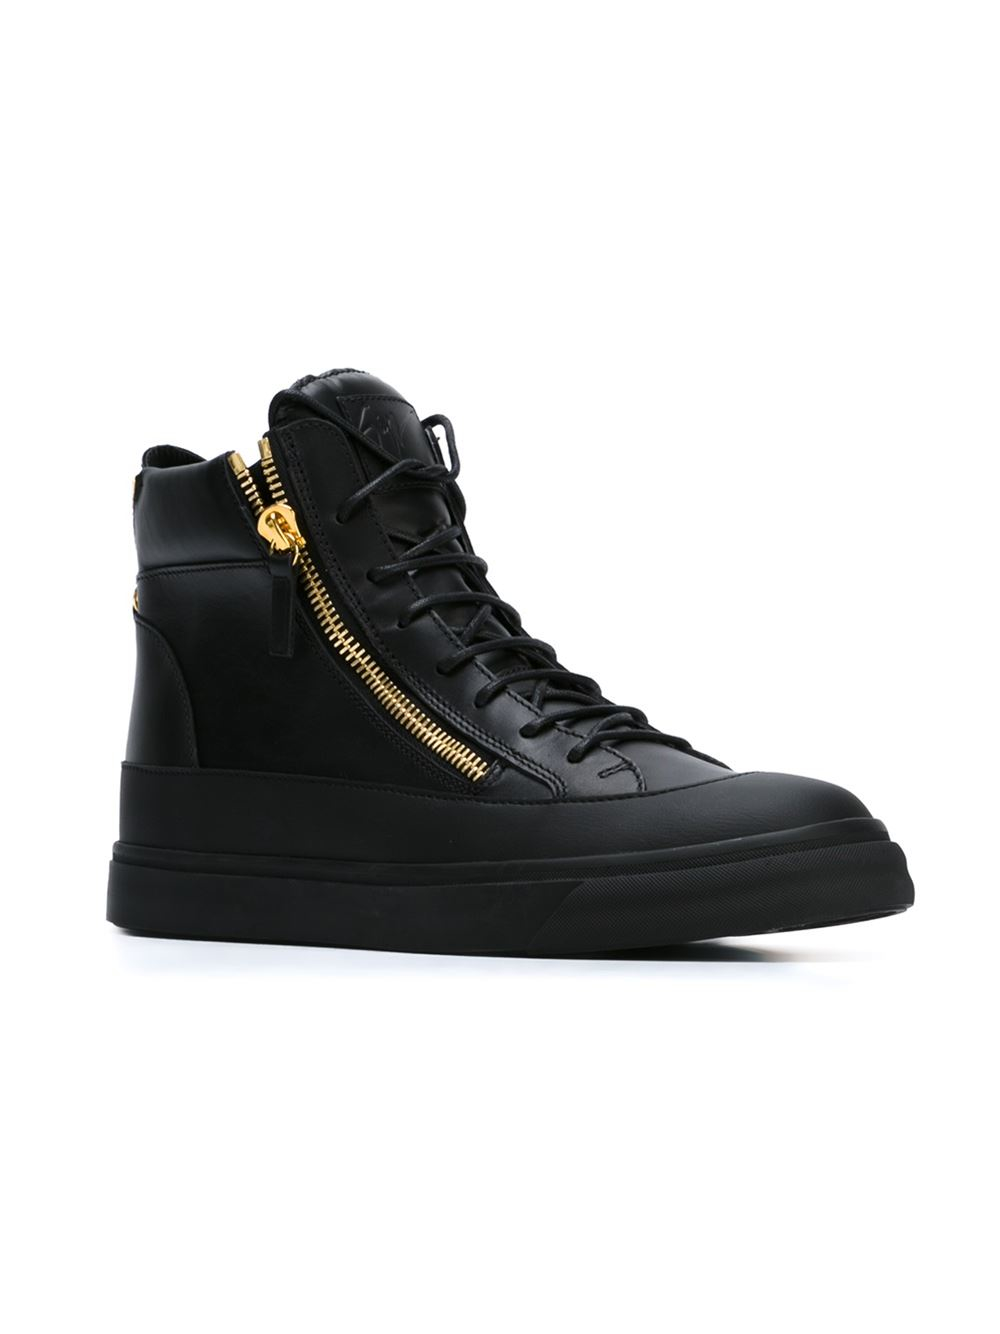 Giuseppe Zanotti Leather High-Top Sneakers in Black for Men | Lyst